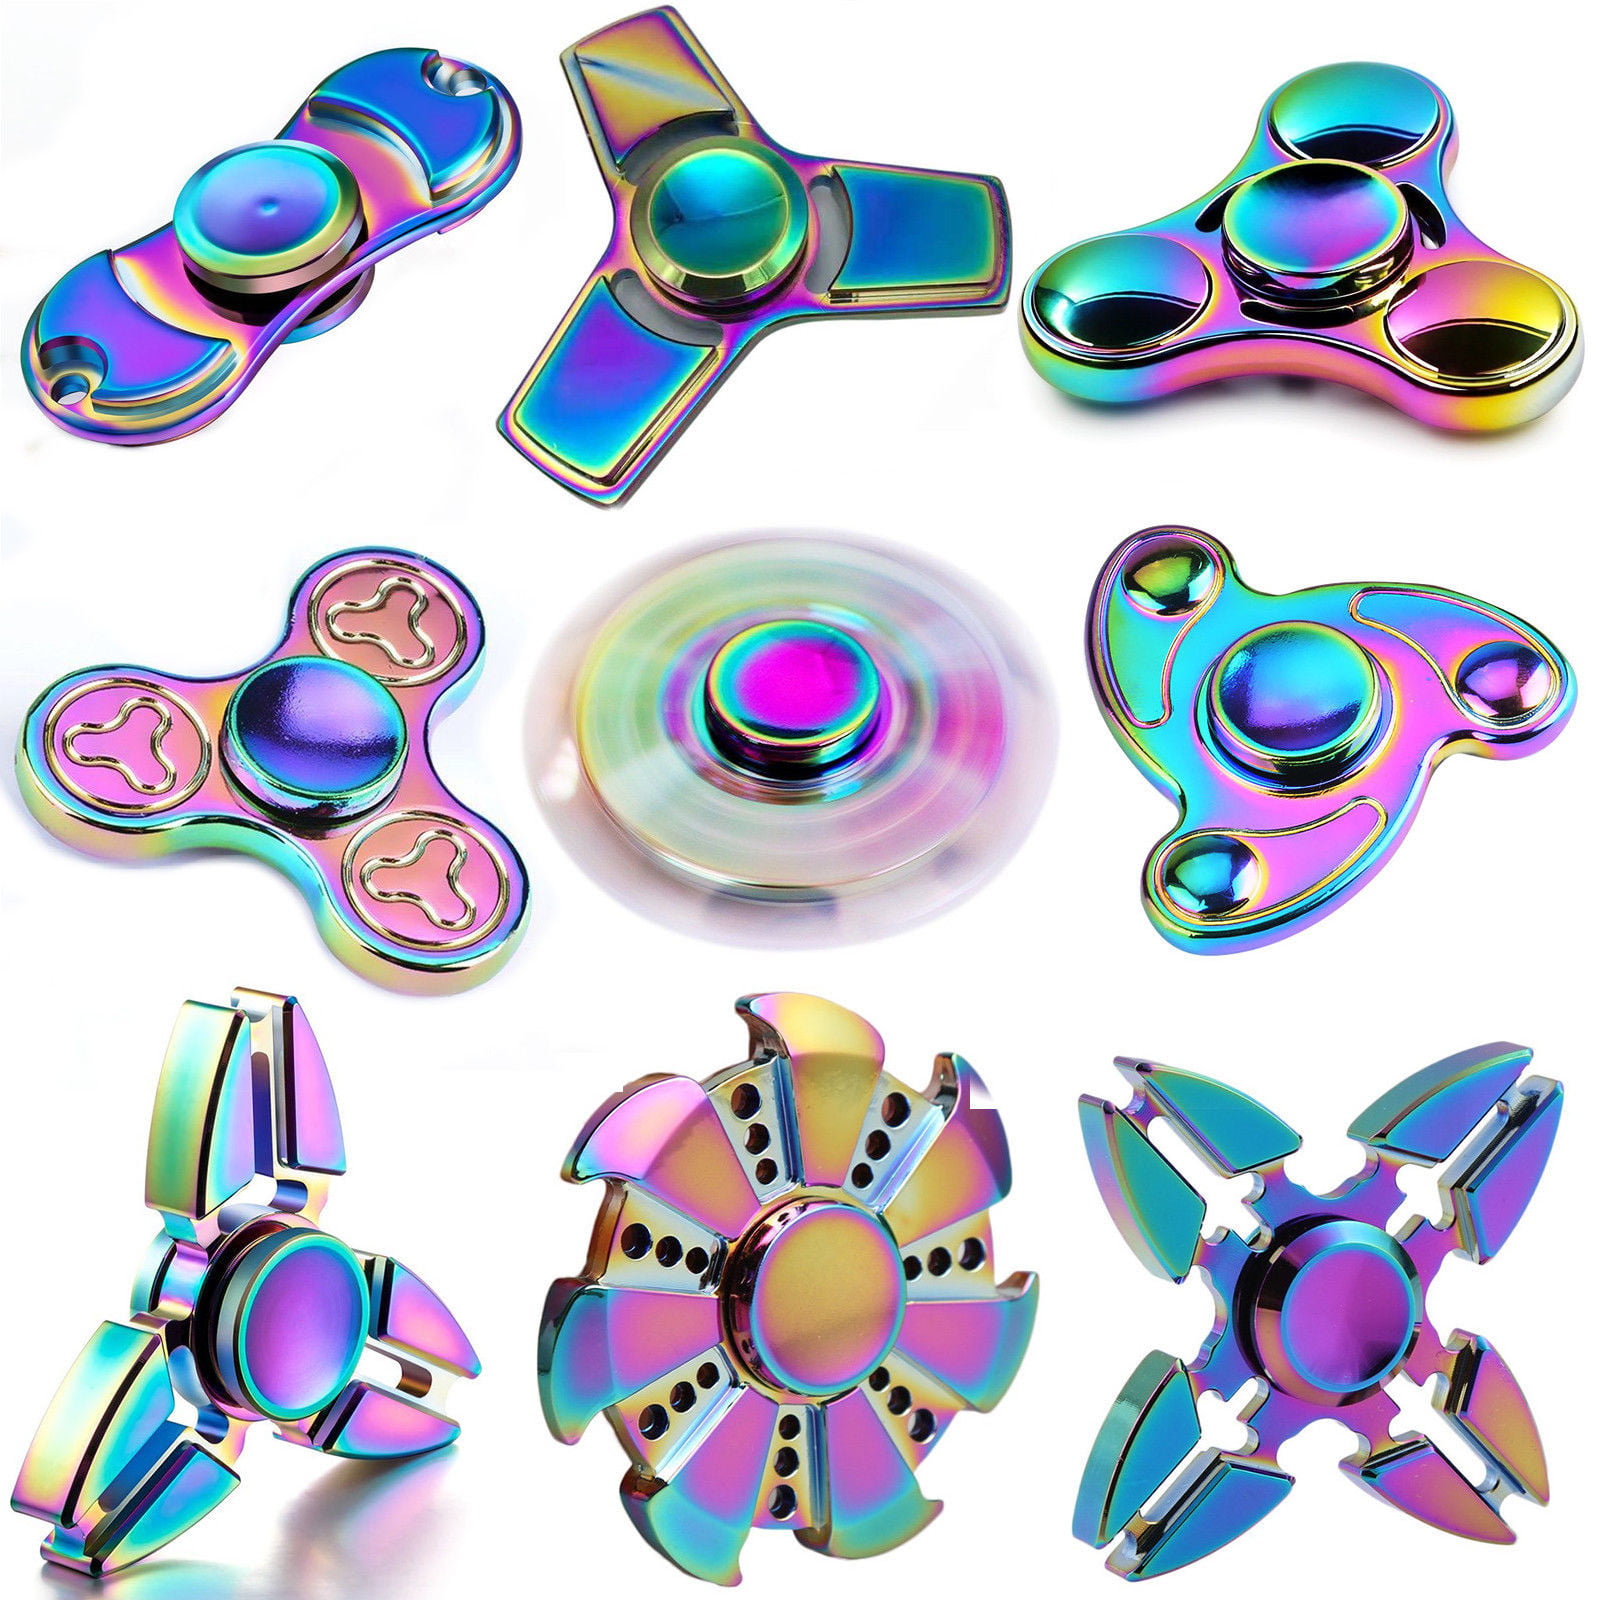 Tri Fidget Hand Spinner Triangle Colorful Finger Toy EDC Focus ADHD BLUE 10 PACK 